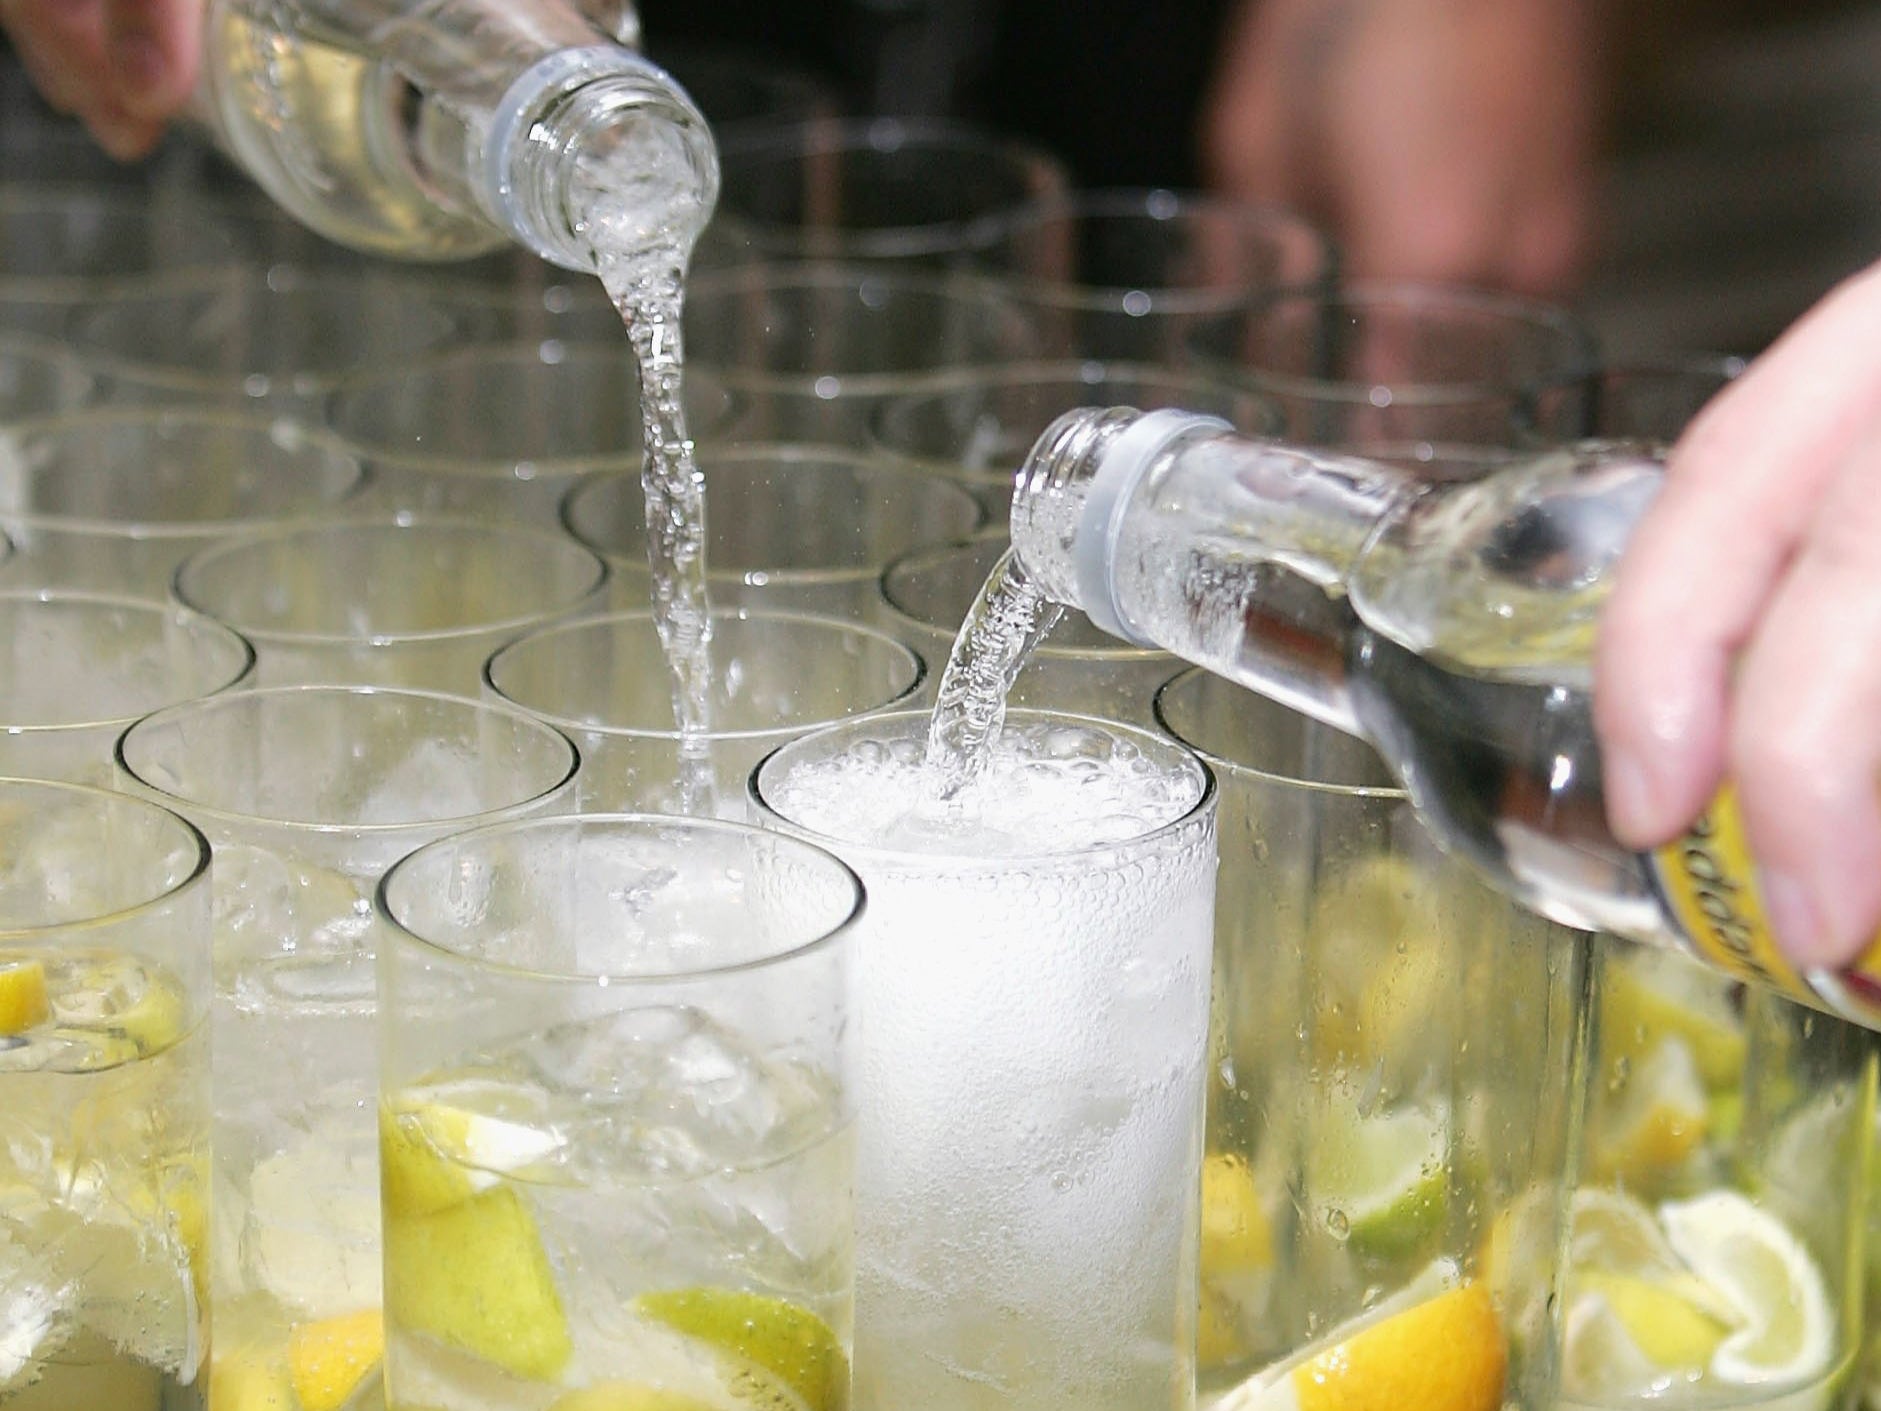 Gin was post popular with London dads, according to the poll